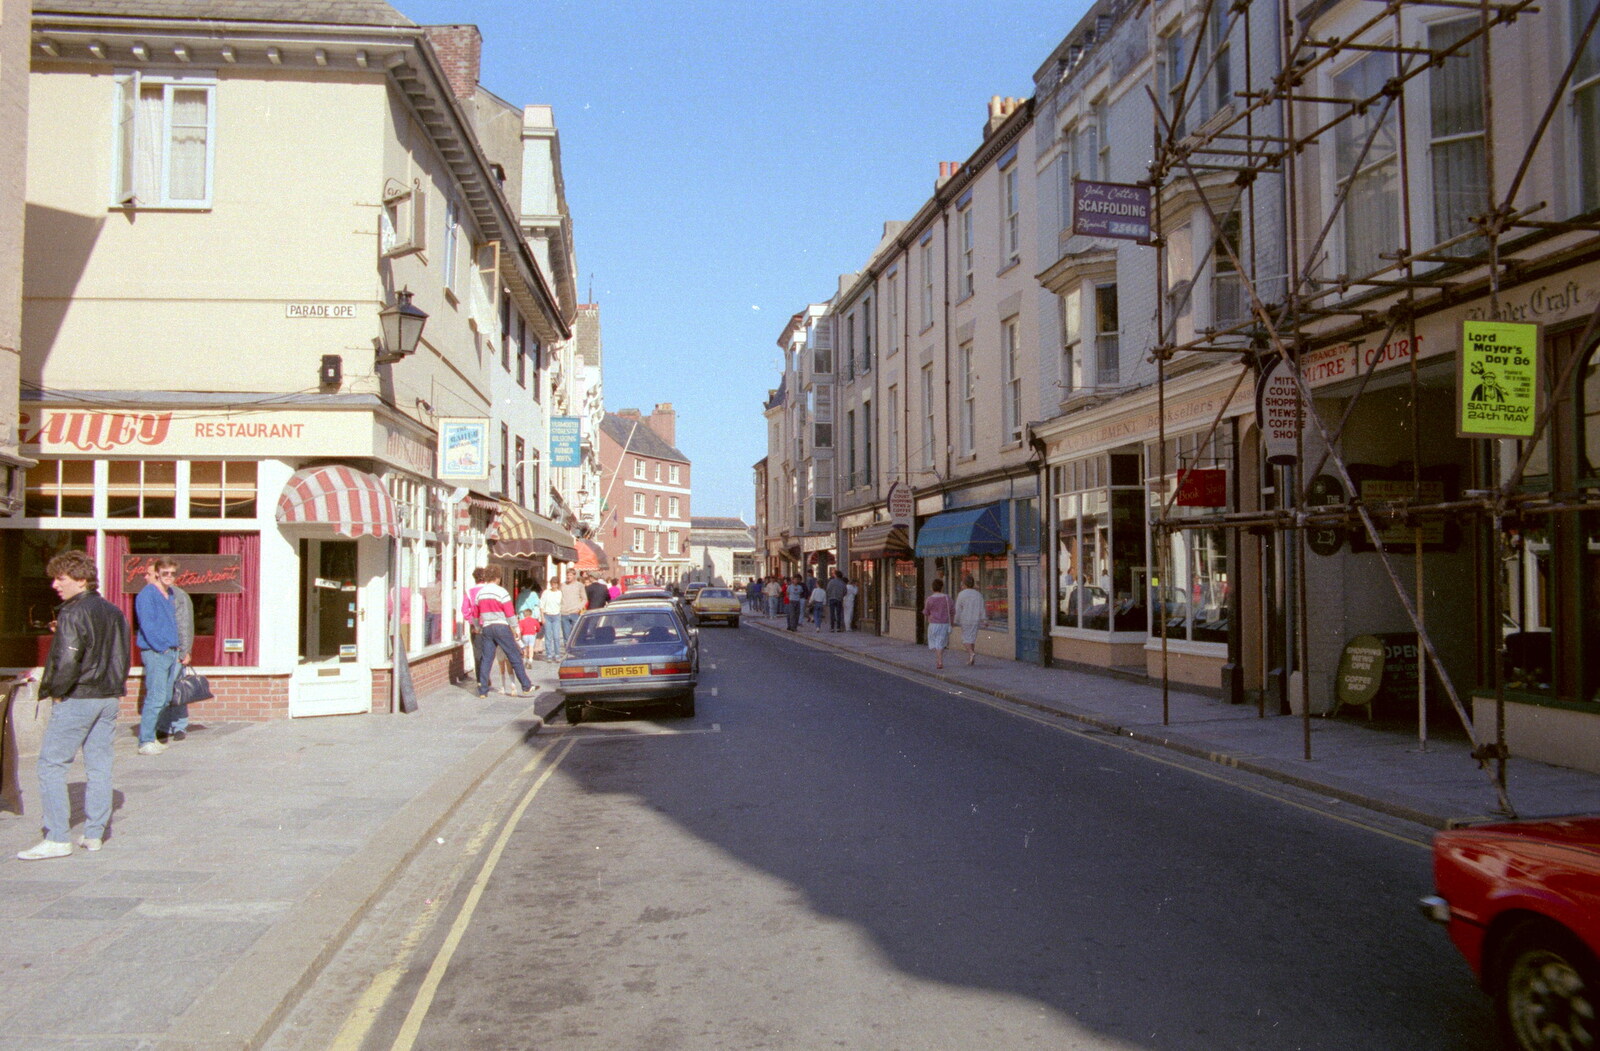 Southside Street through the Barbican from Uni: Night and Day on the Barbican, Plymouth, Devon - 1st May 1986